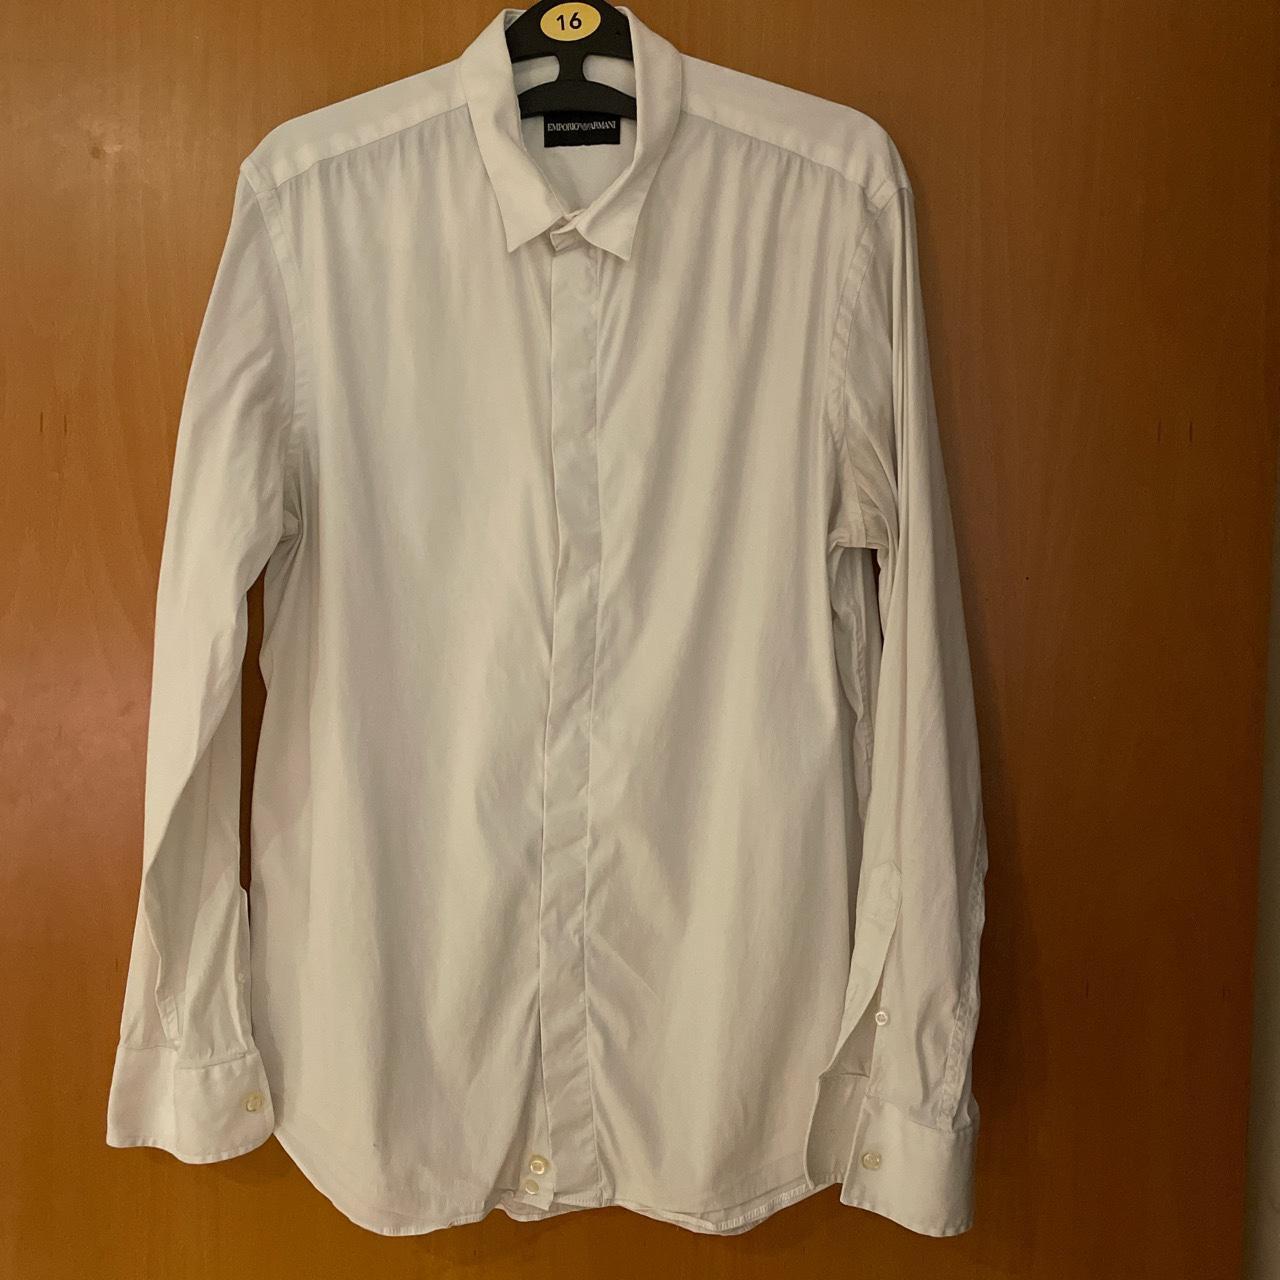 Emporio Armani formal shirt. Had this when I used to... - Depop